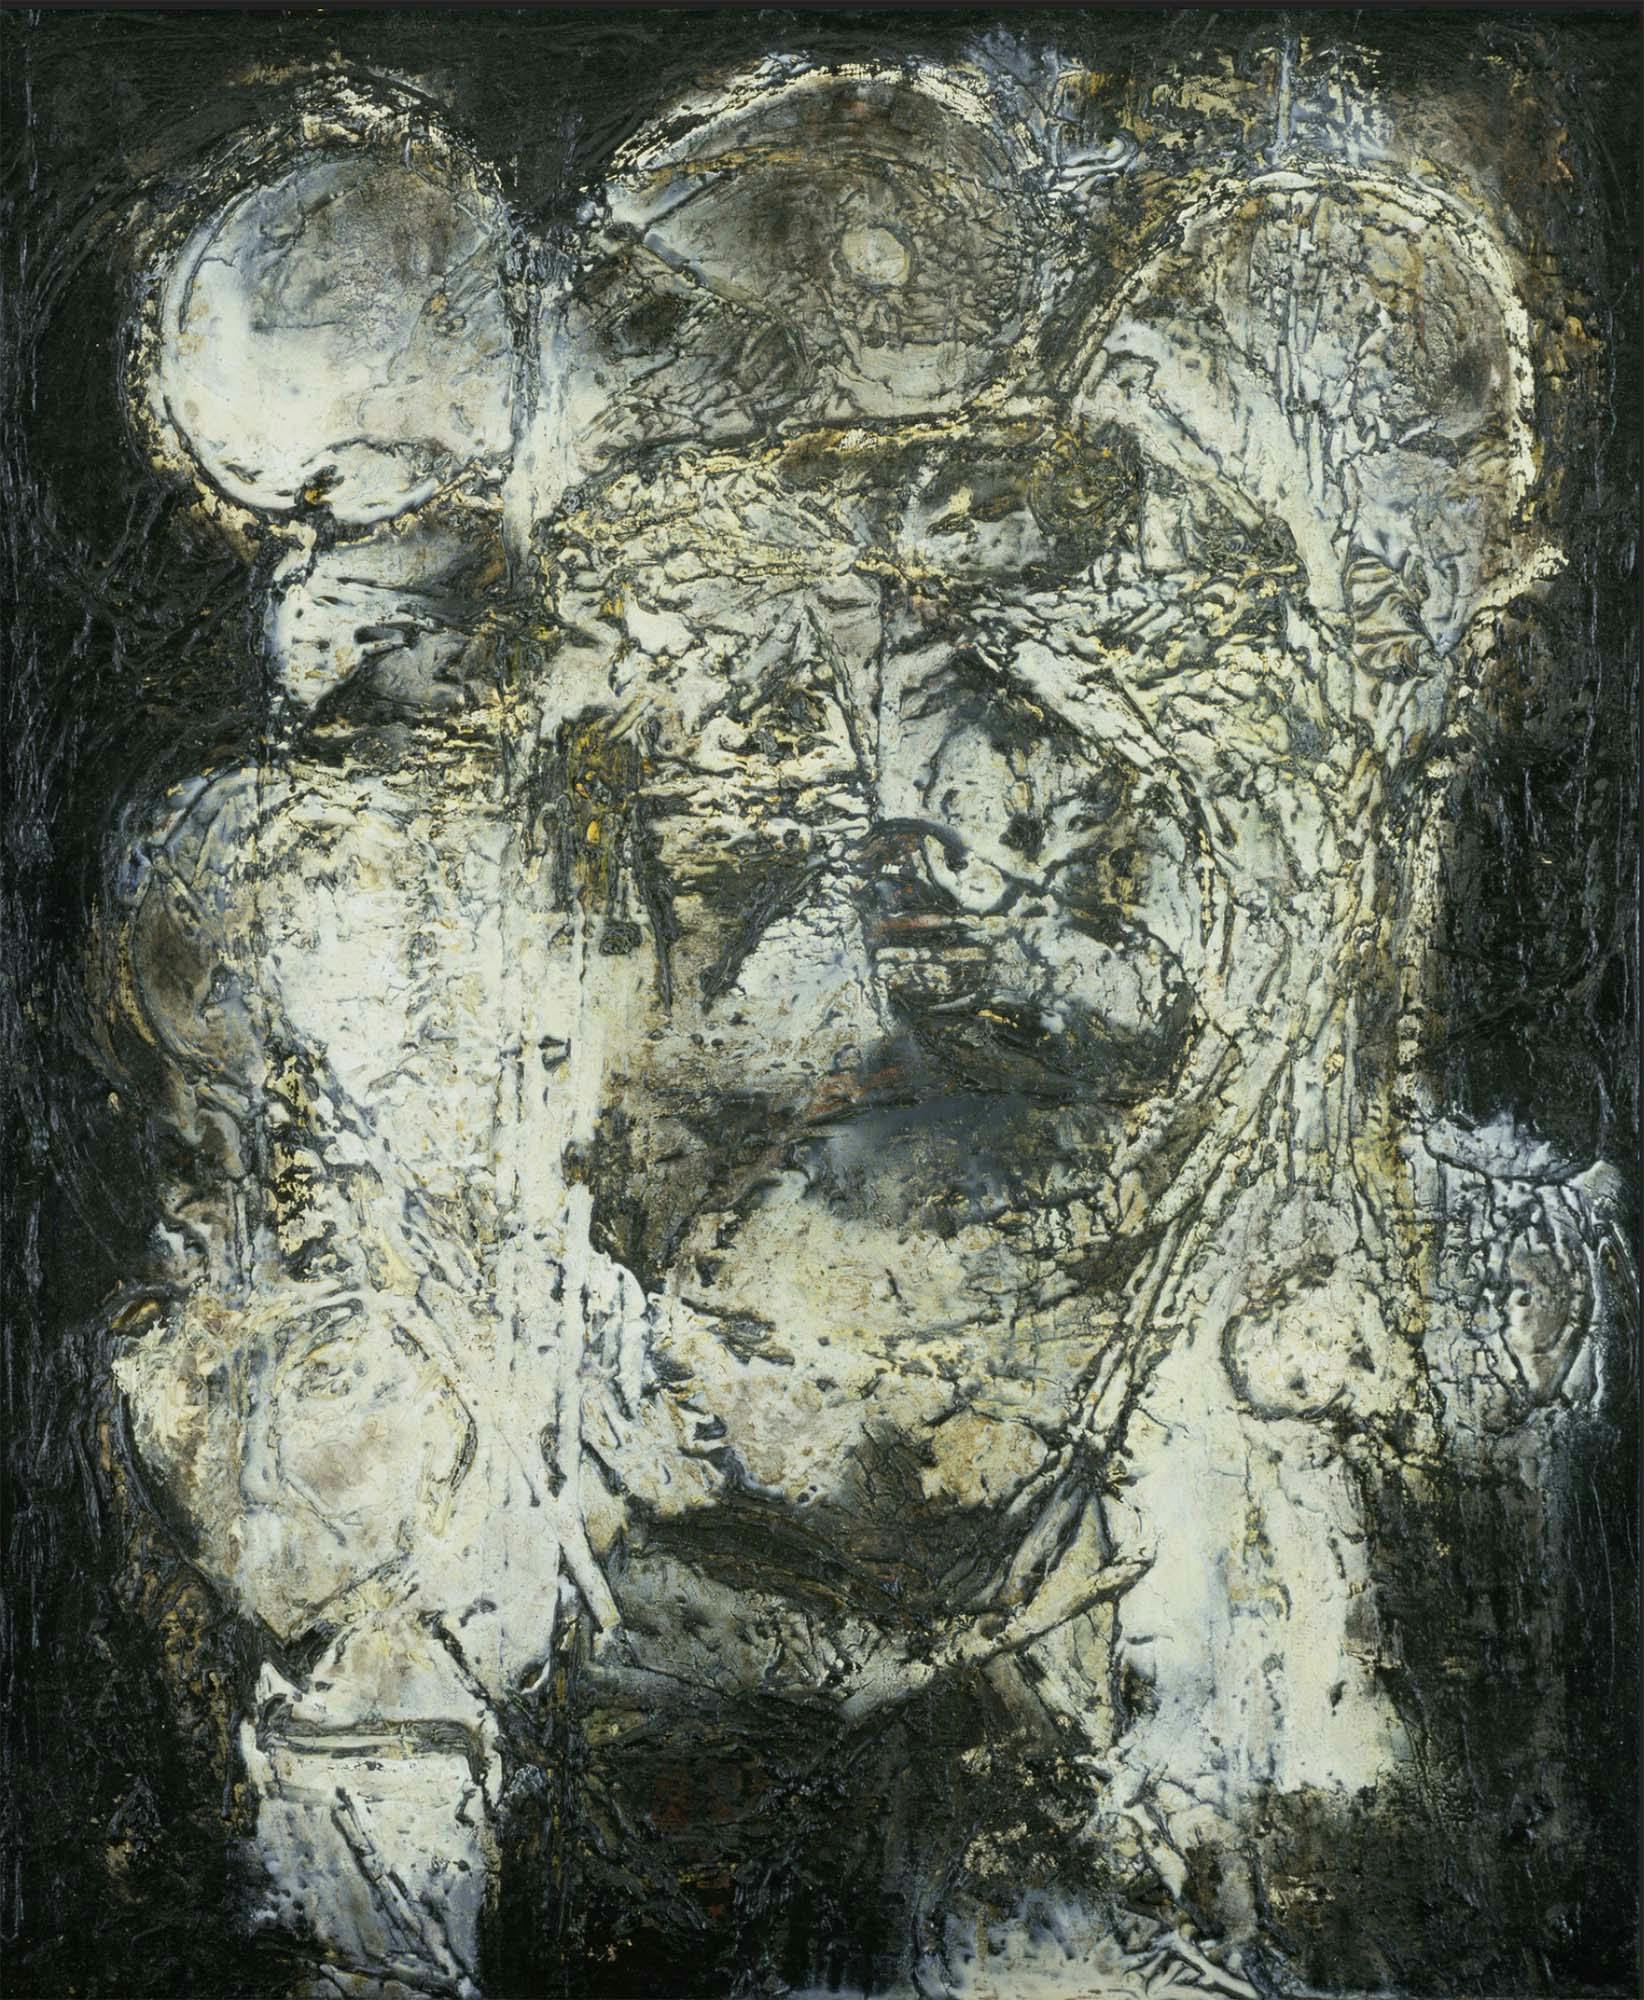 Number 11: A Presence
1949
Oil on canvas
25 1/8 x 21 1/8 in. (63.8 x 53.7 cm)
The Museum of Modern Art, New York, Katherine Cornell Fund (100.1950)

 – The Richard Pousette-Dart Foundation